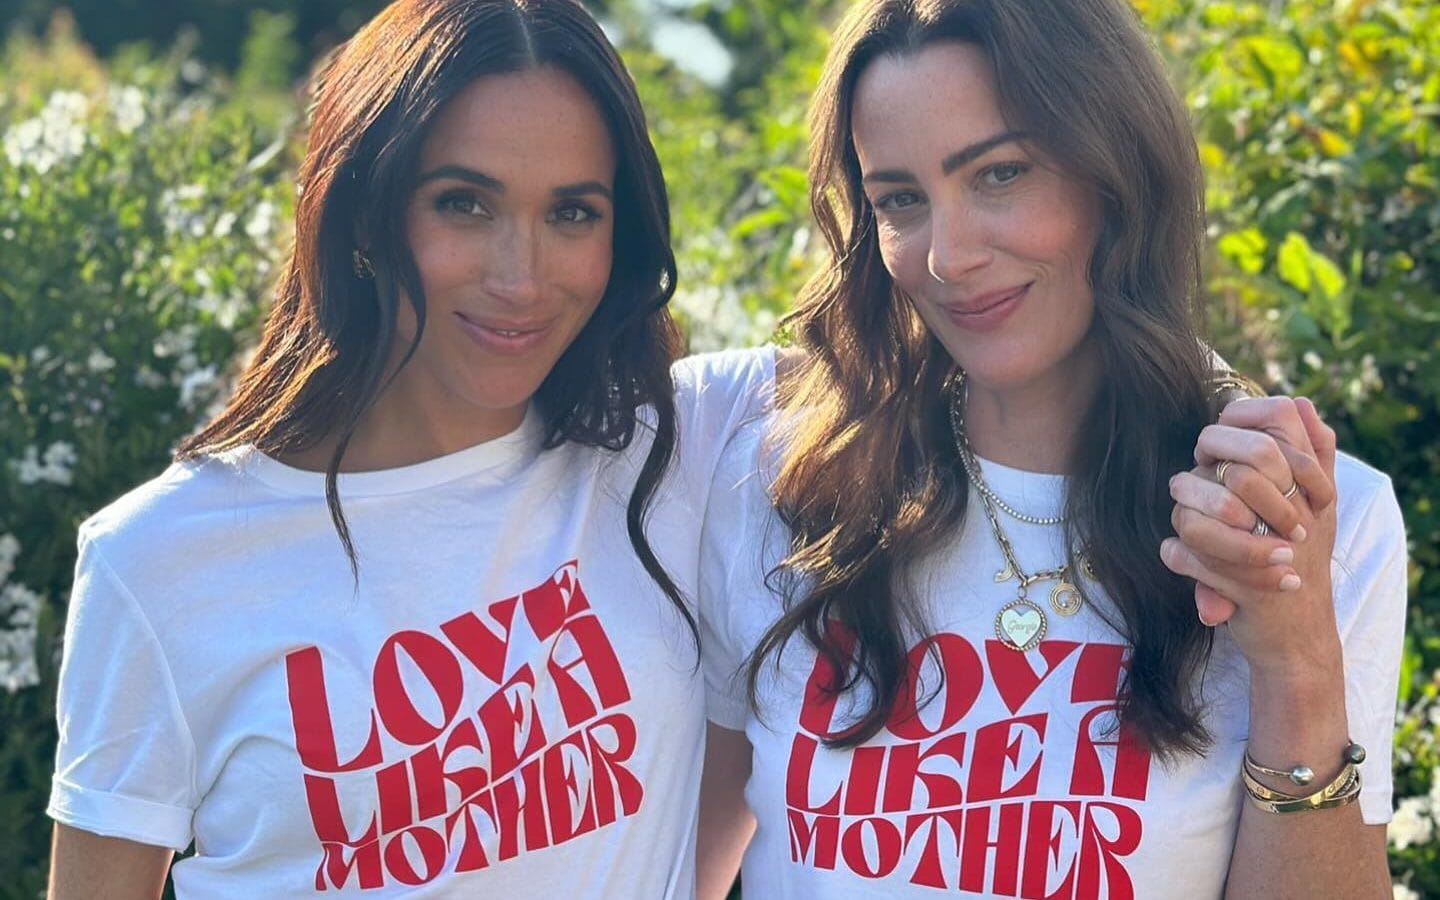 meghan poses in charity t-shirt to support friend who promoted her jam